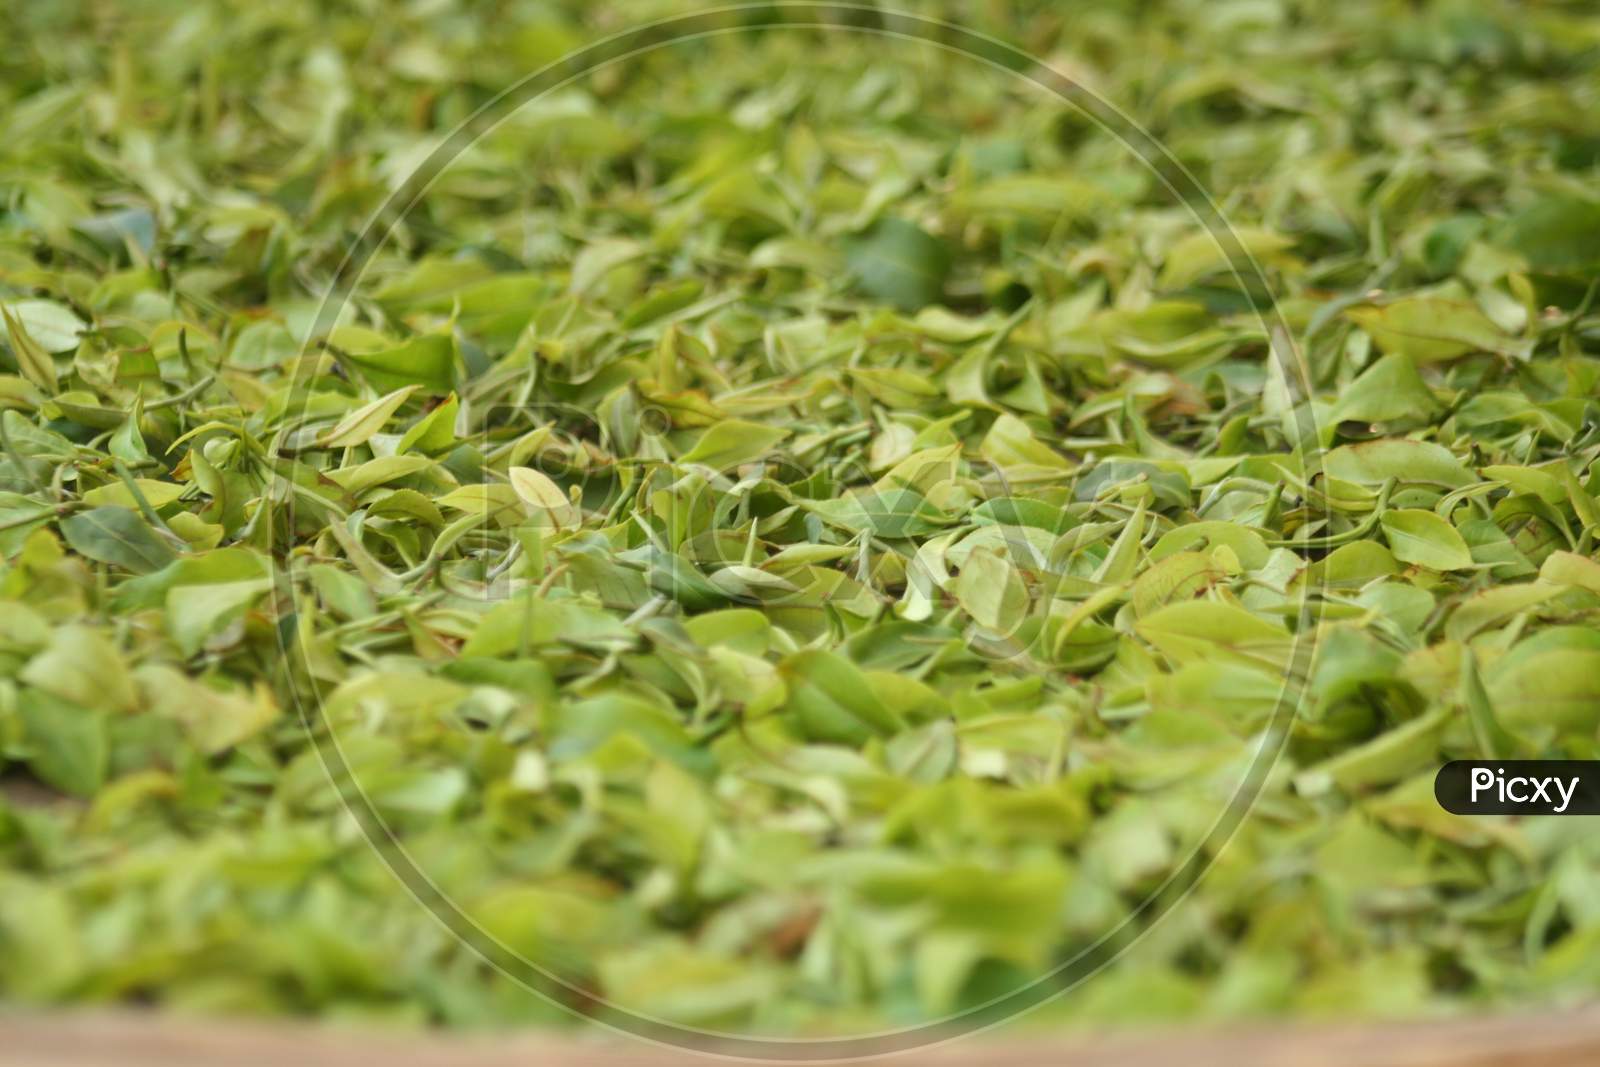 Tea harvesting is dominated by tender leaves and buds